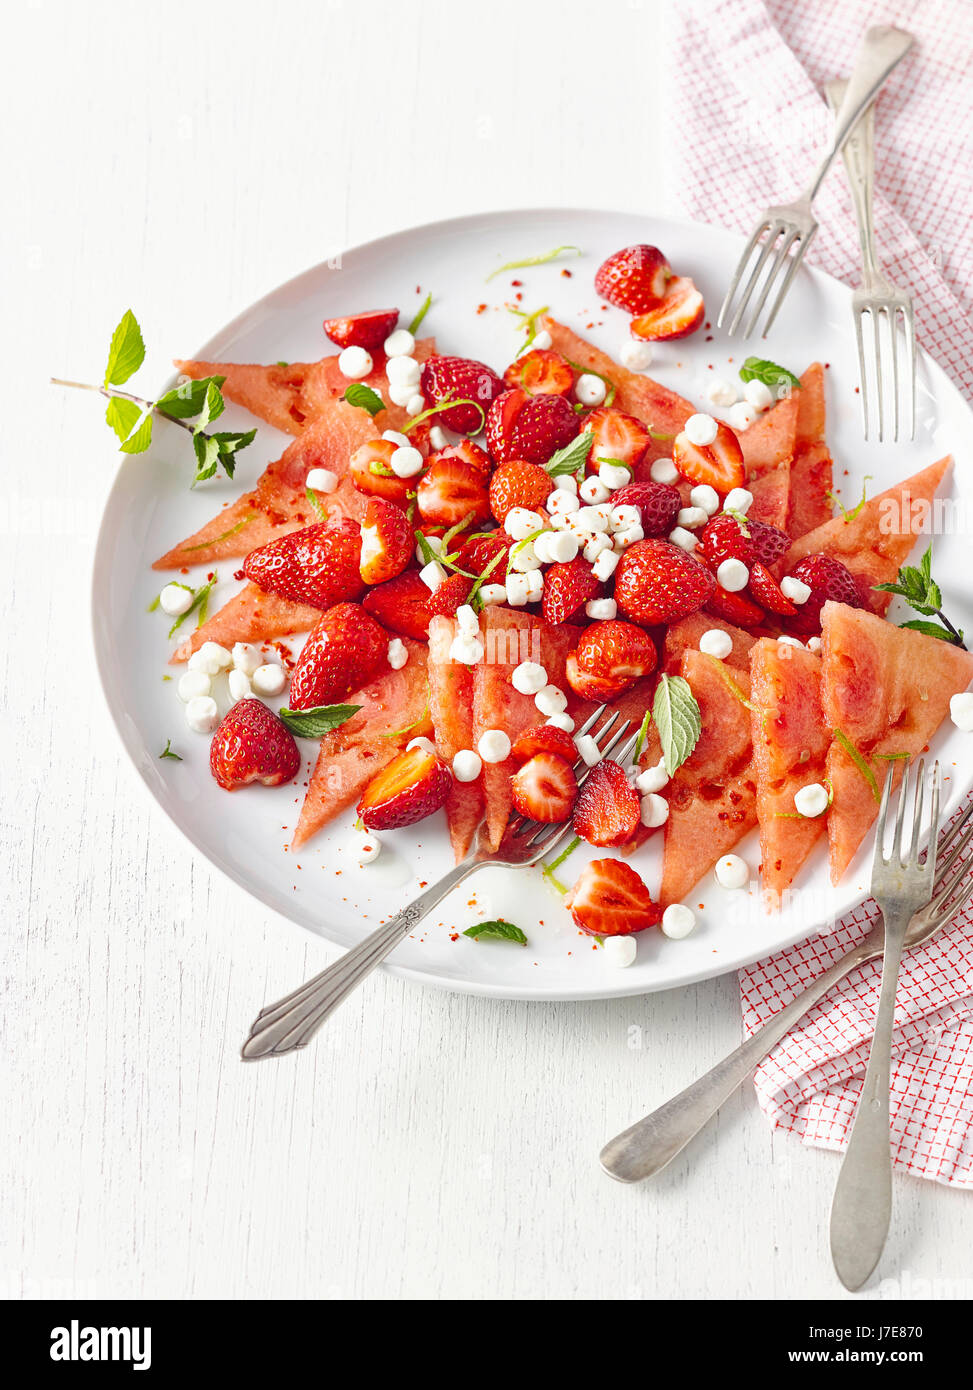 Melon carpaccio with strawberries and goat cheese Stock Photo